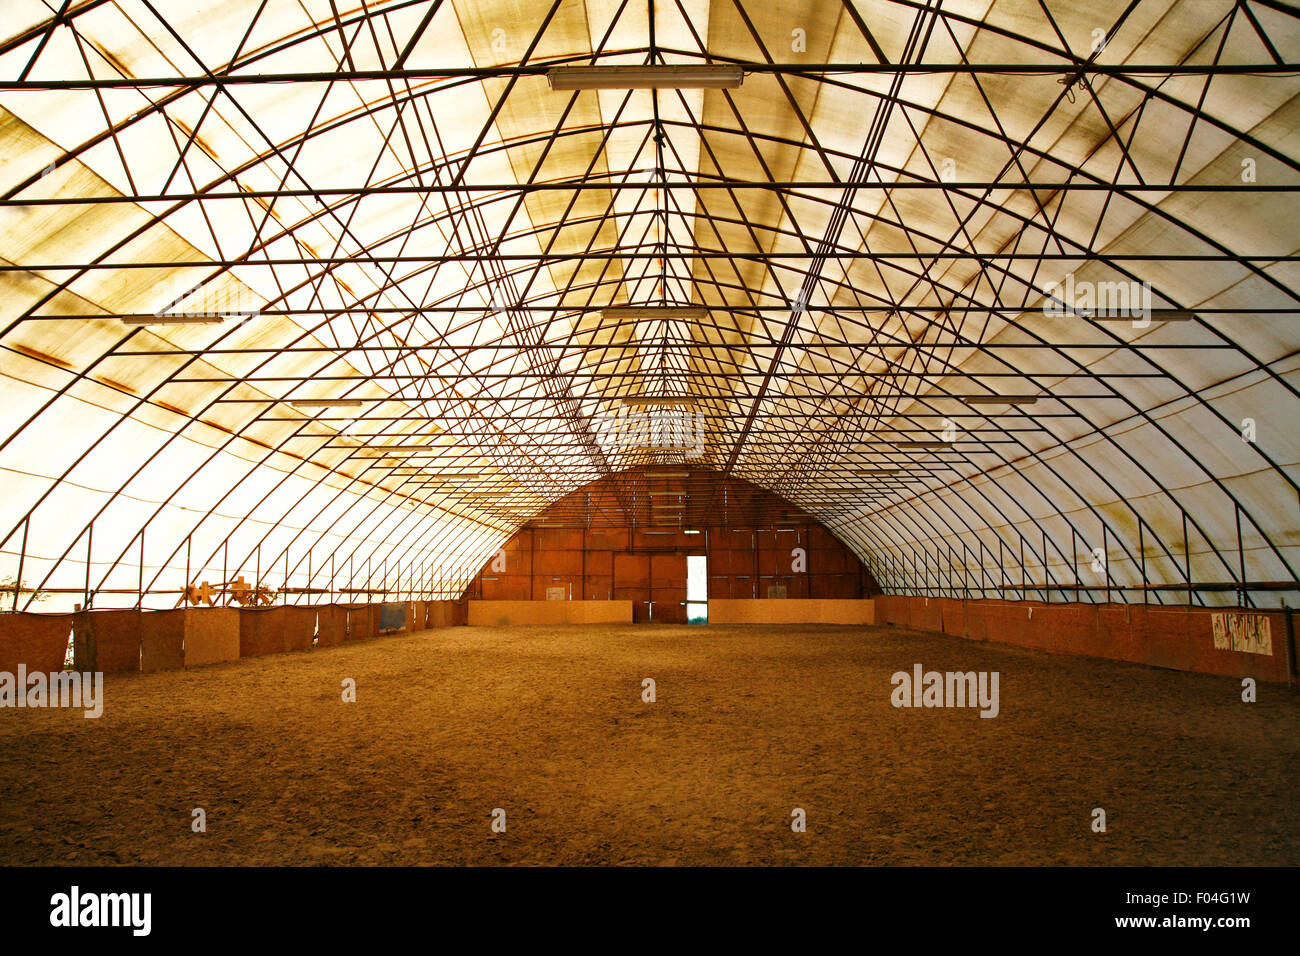 Indoor riding arena covering sand for trainings Stock Photo